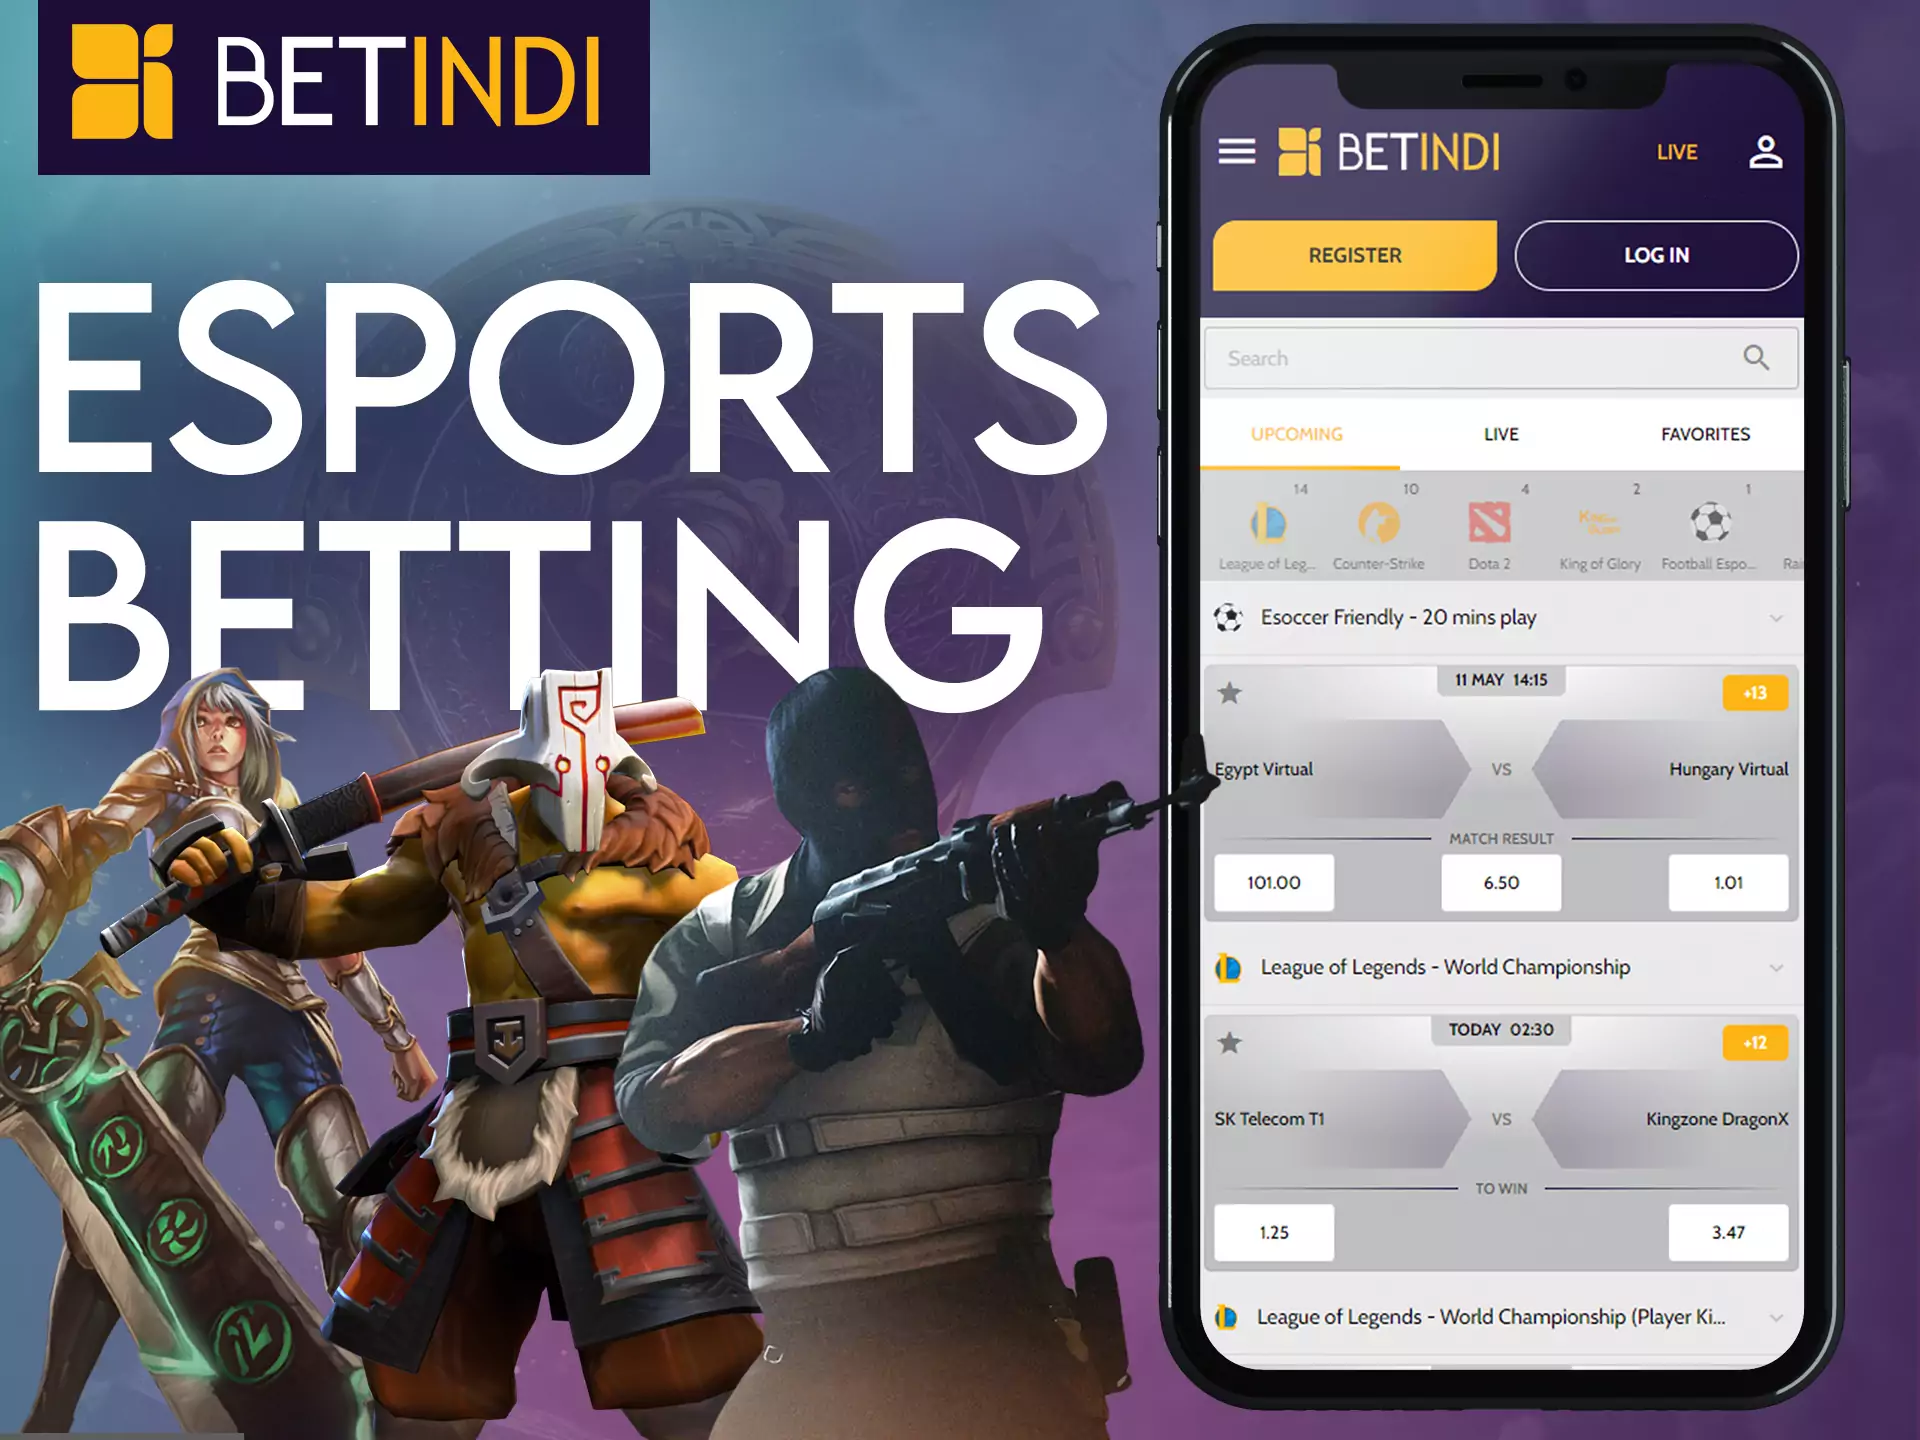 Place bets and support your favorite cyber teams on Betindi.